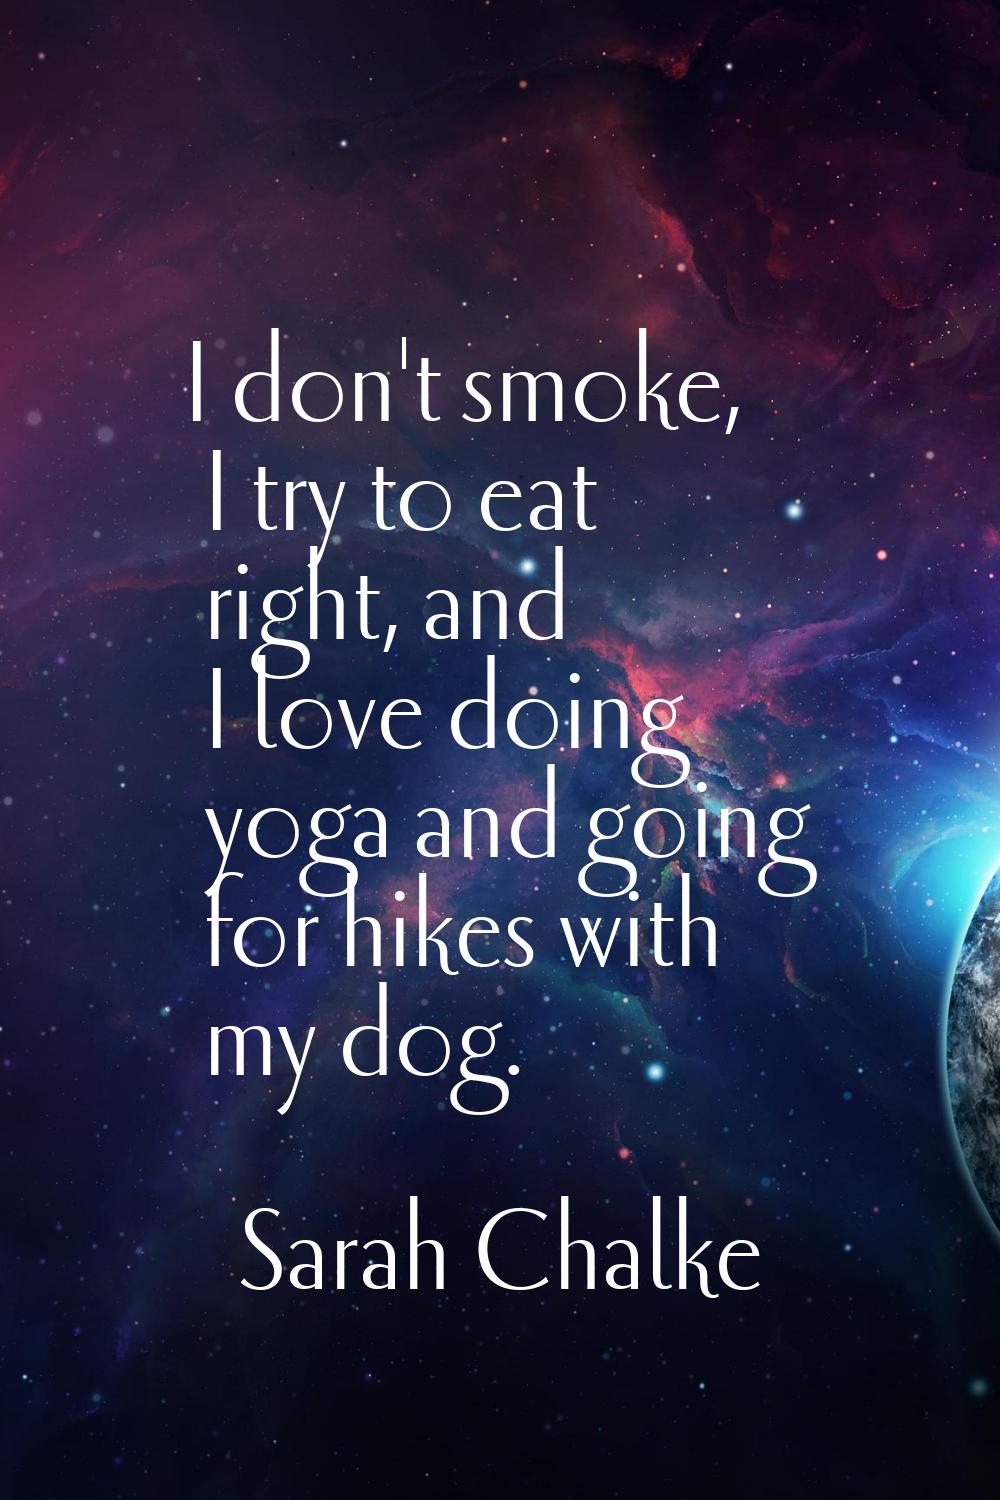 I don't smoke, I try to eat right, and I love doing yoga and going for hikes with my dog.